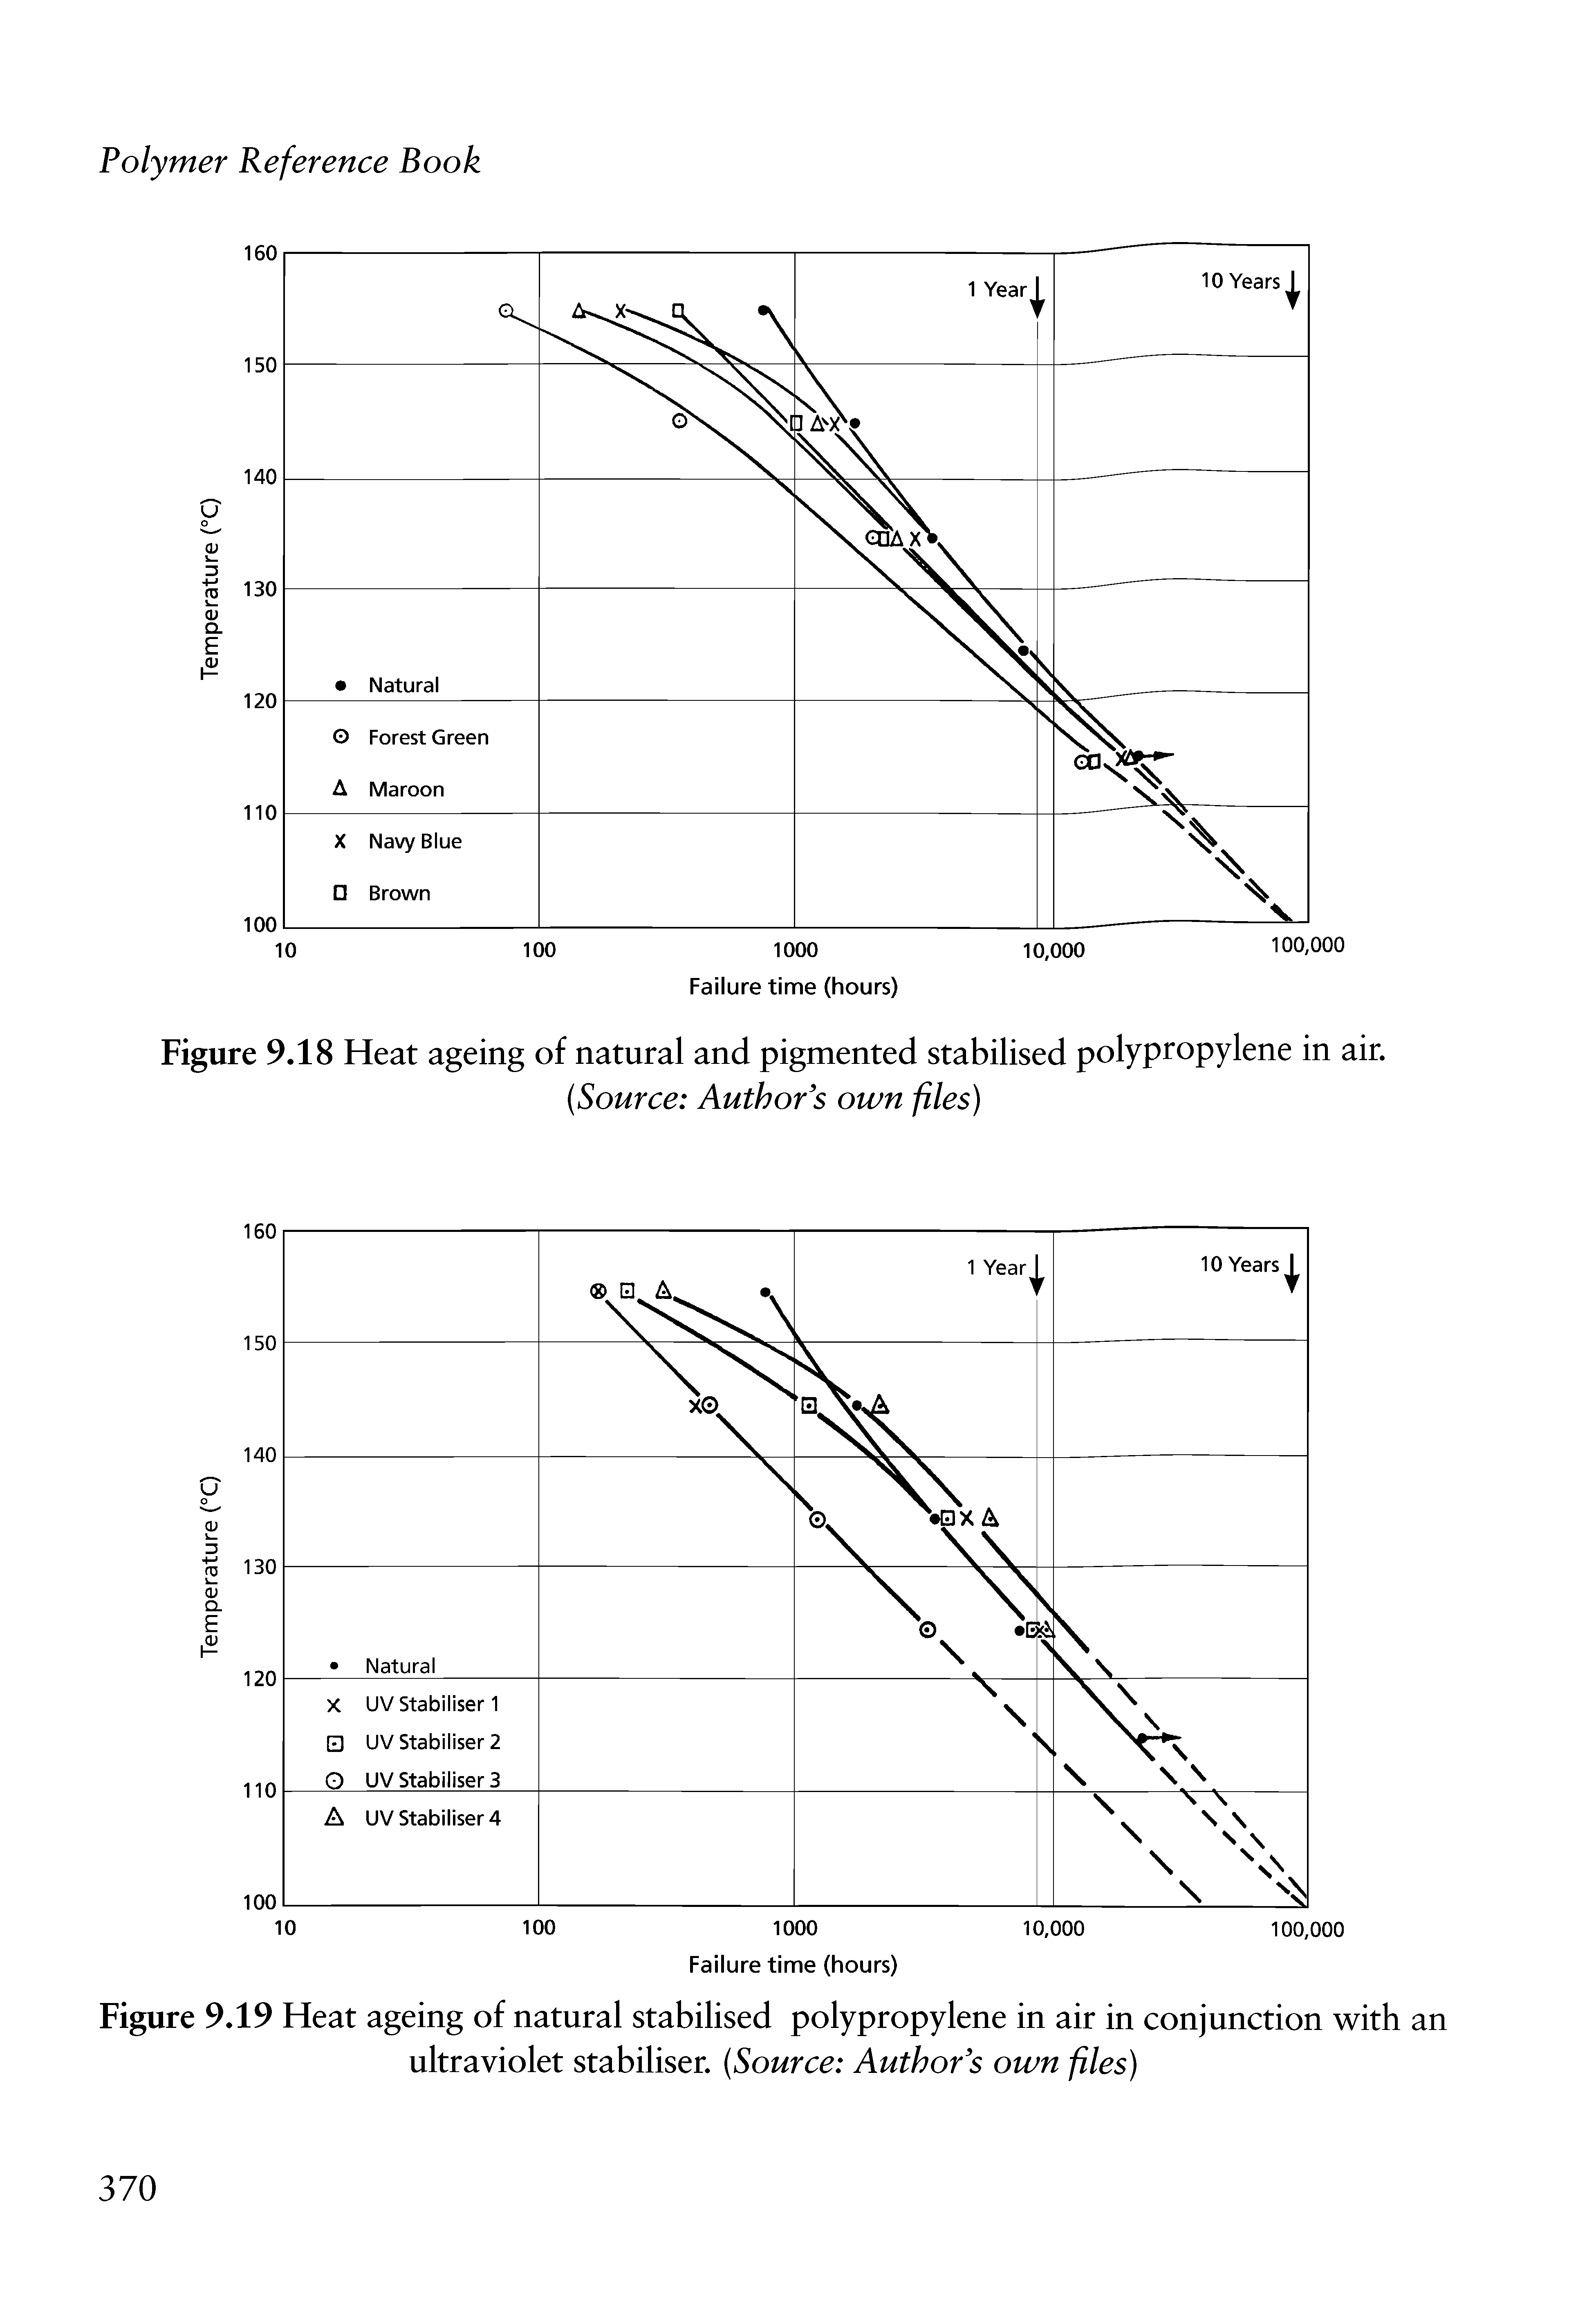 Figure 9.19 Heat ageing of natural stabilised polypropylene in air in conjunction with an ultraviolet stabiliser. Source Author s own files)...